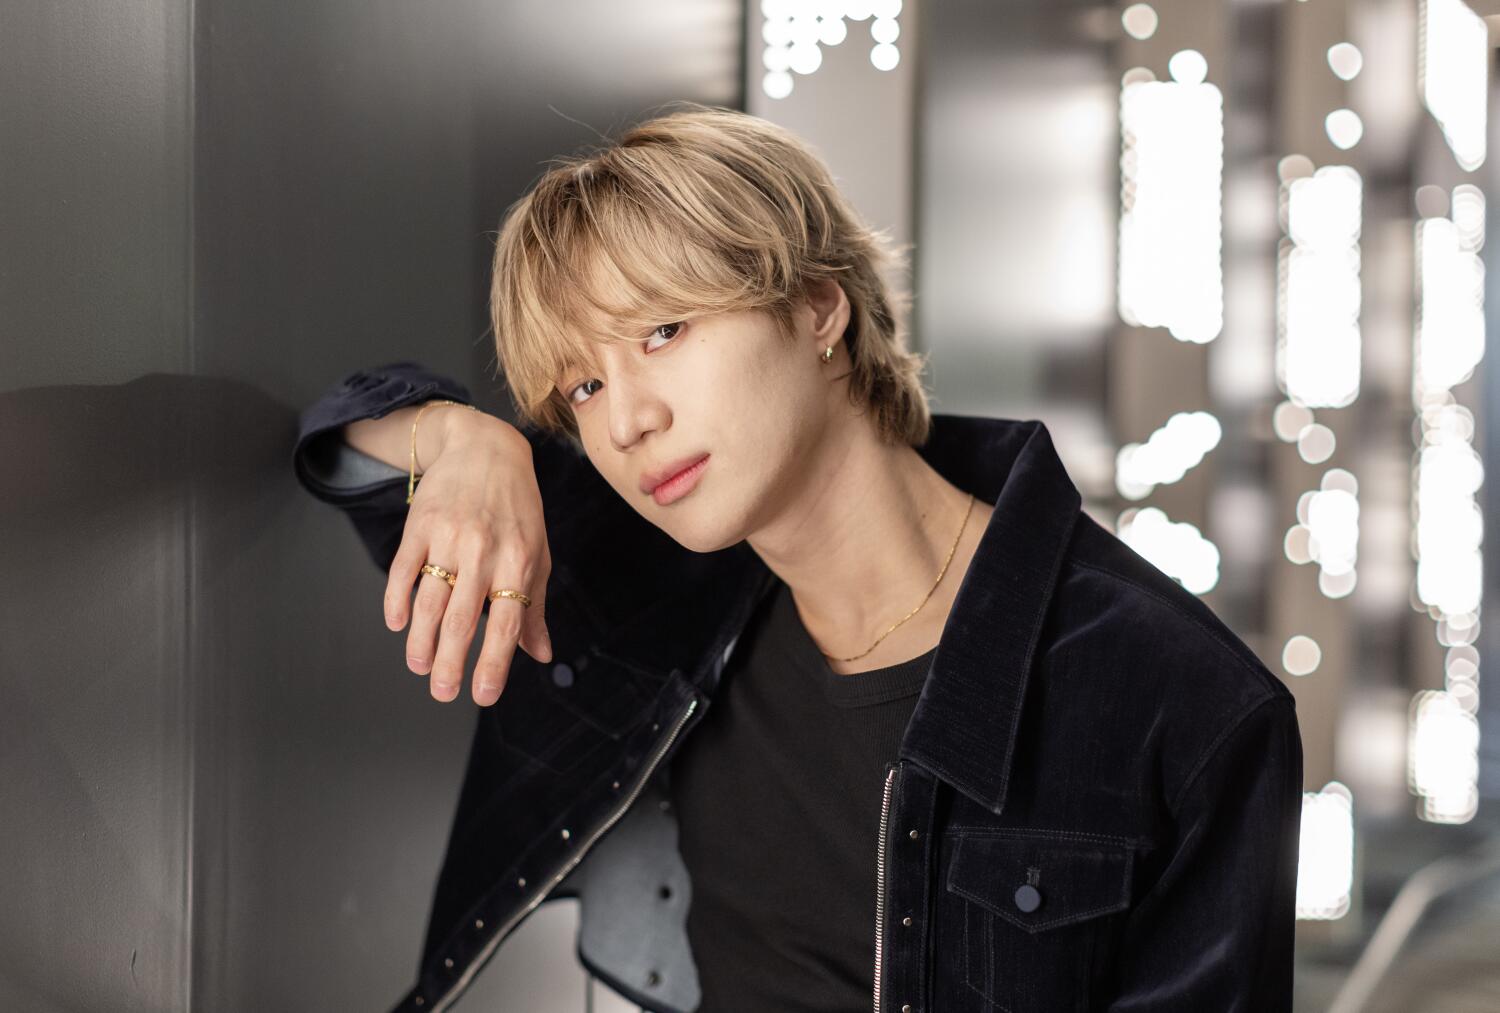 Boundary-pushing K-pop superstar Taemin is 'grateful but still hungry' to take the genre to greater heights